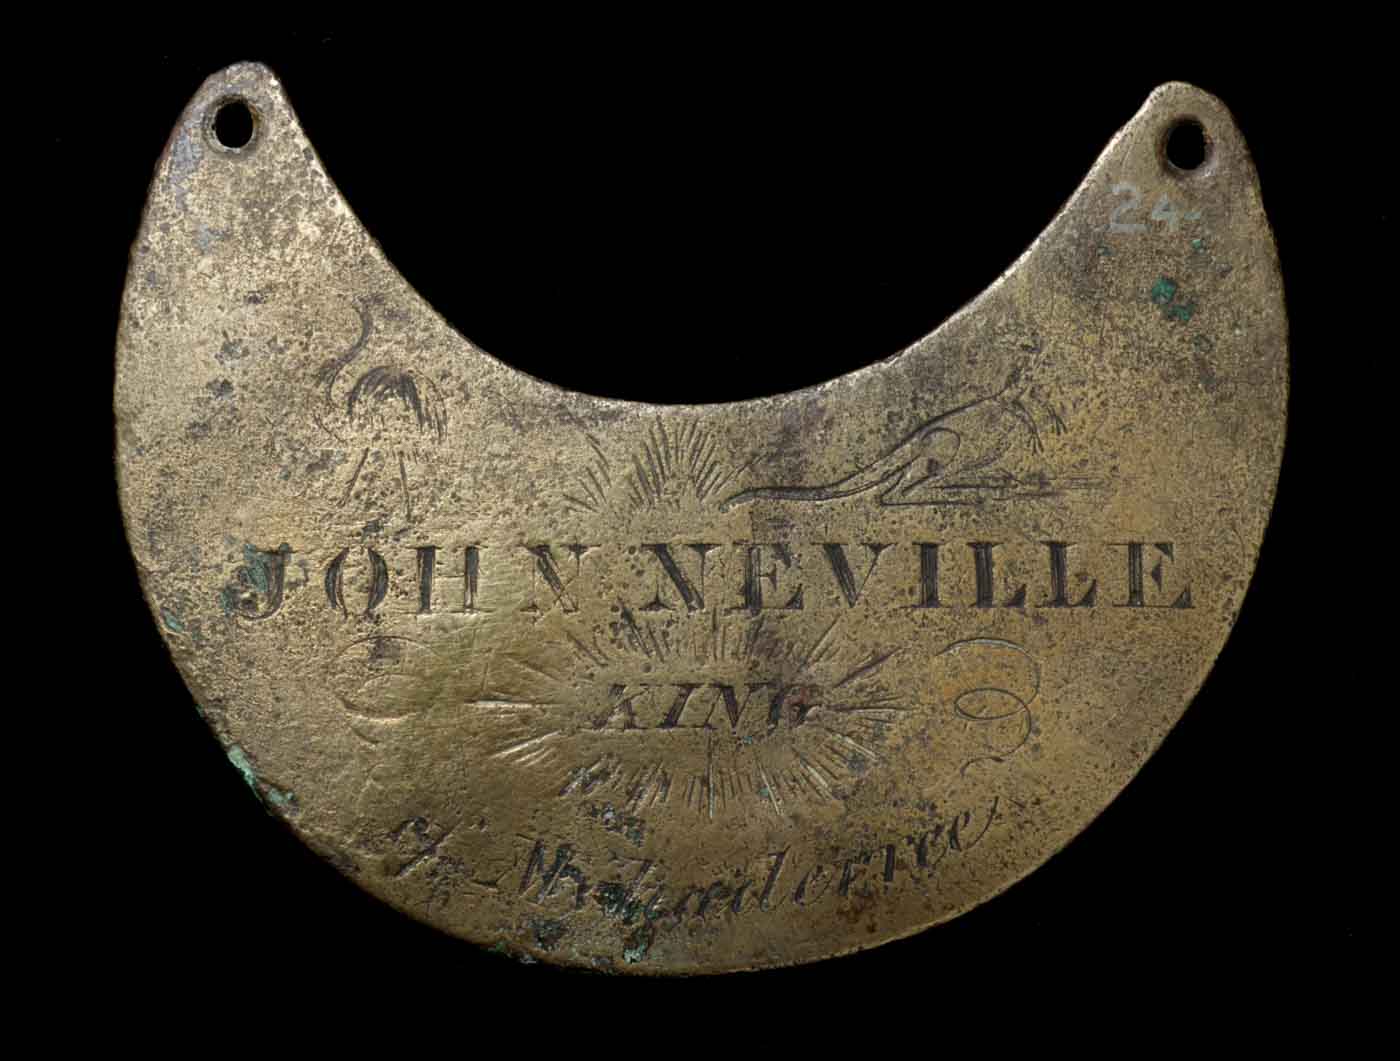 Engraved breastplate with images of a kangaroo and emu. The surface is pitted and dark around the edges.